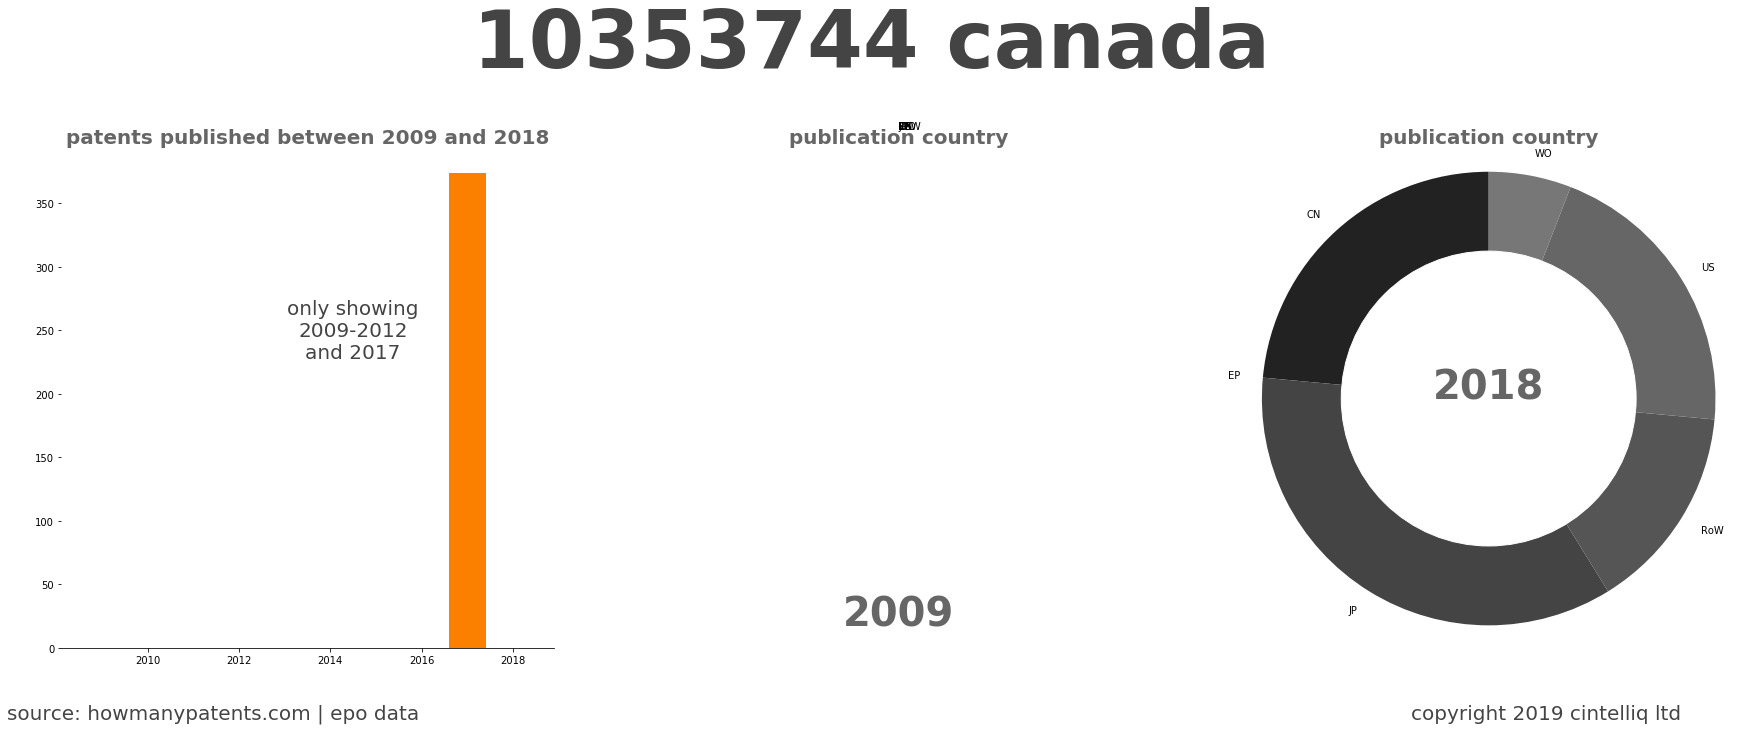 summary of patents for 10353744 Canada